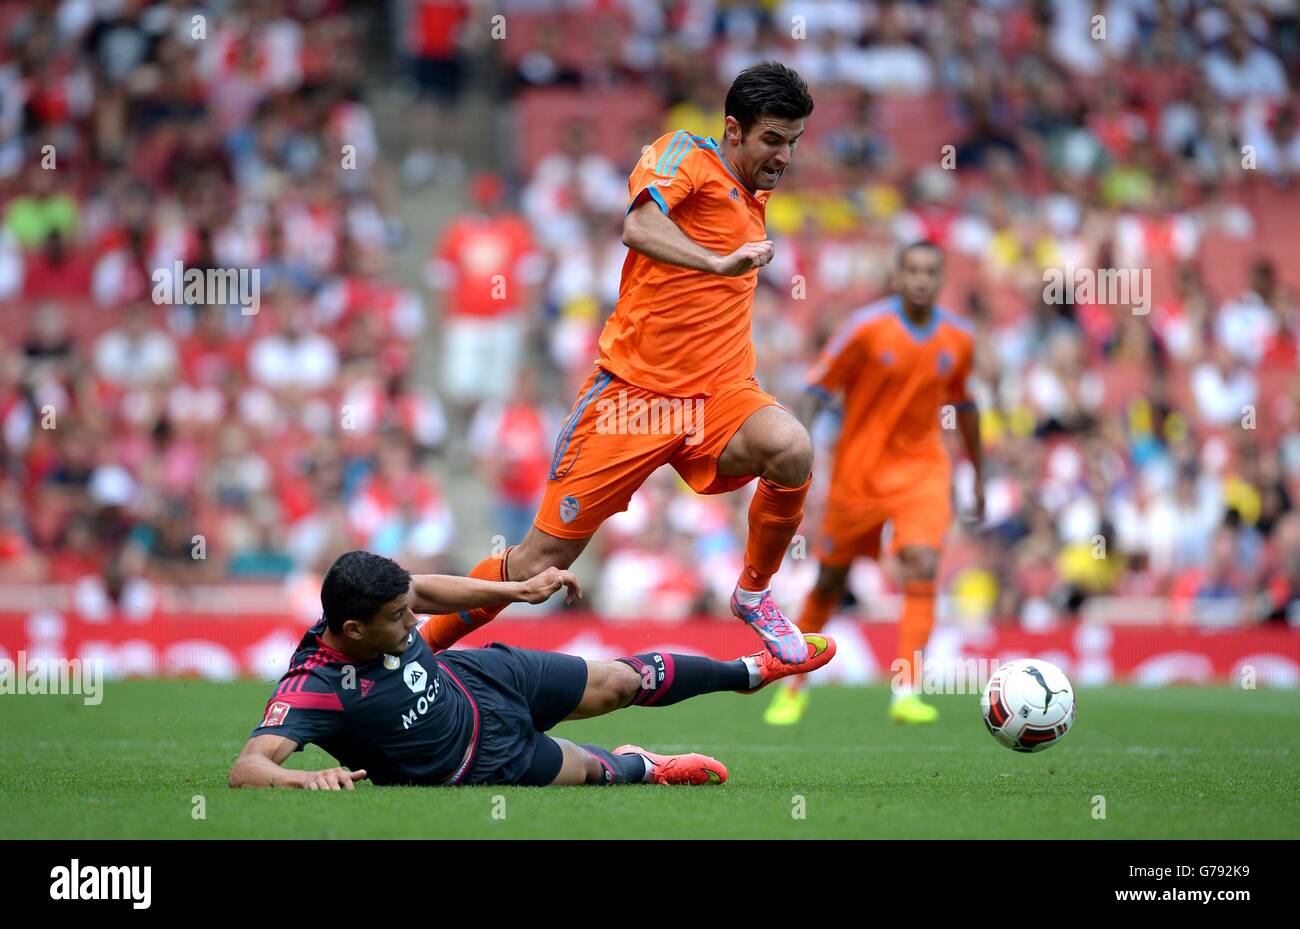 Valencia CF's Rodrigo Moreno Machado skips claer of a challenge from SL Benfica's Benito during the Emirates Cup match at The Emirates Stadium, London. Stock Photo